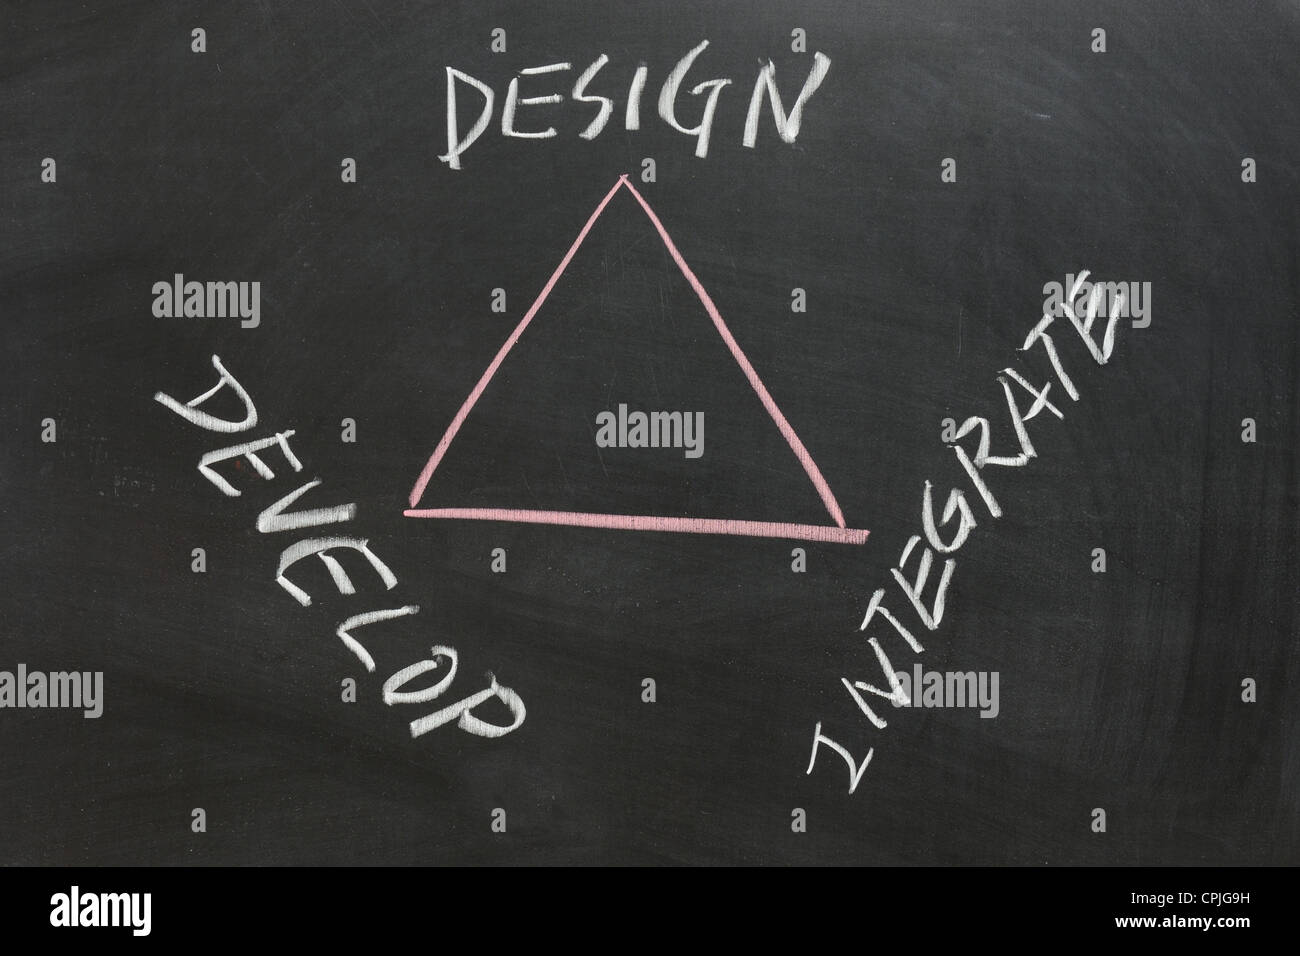 Chalkboard drawing - Relationship between Design, Develop and Integrate Stock Photo